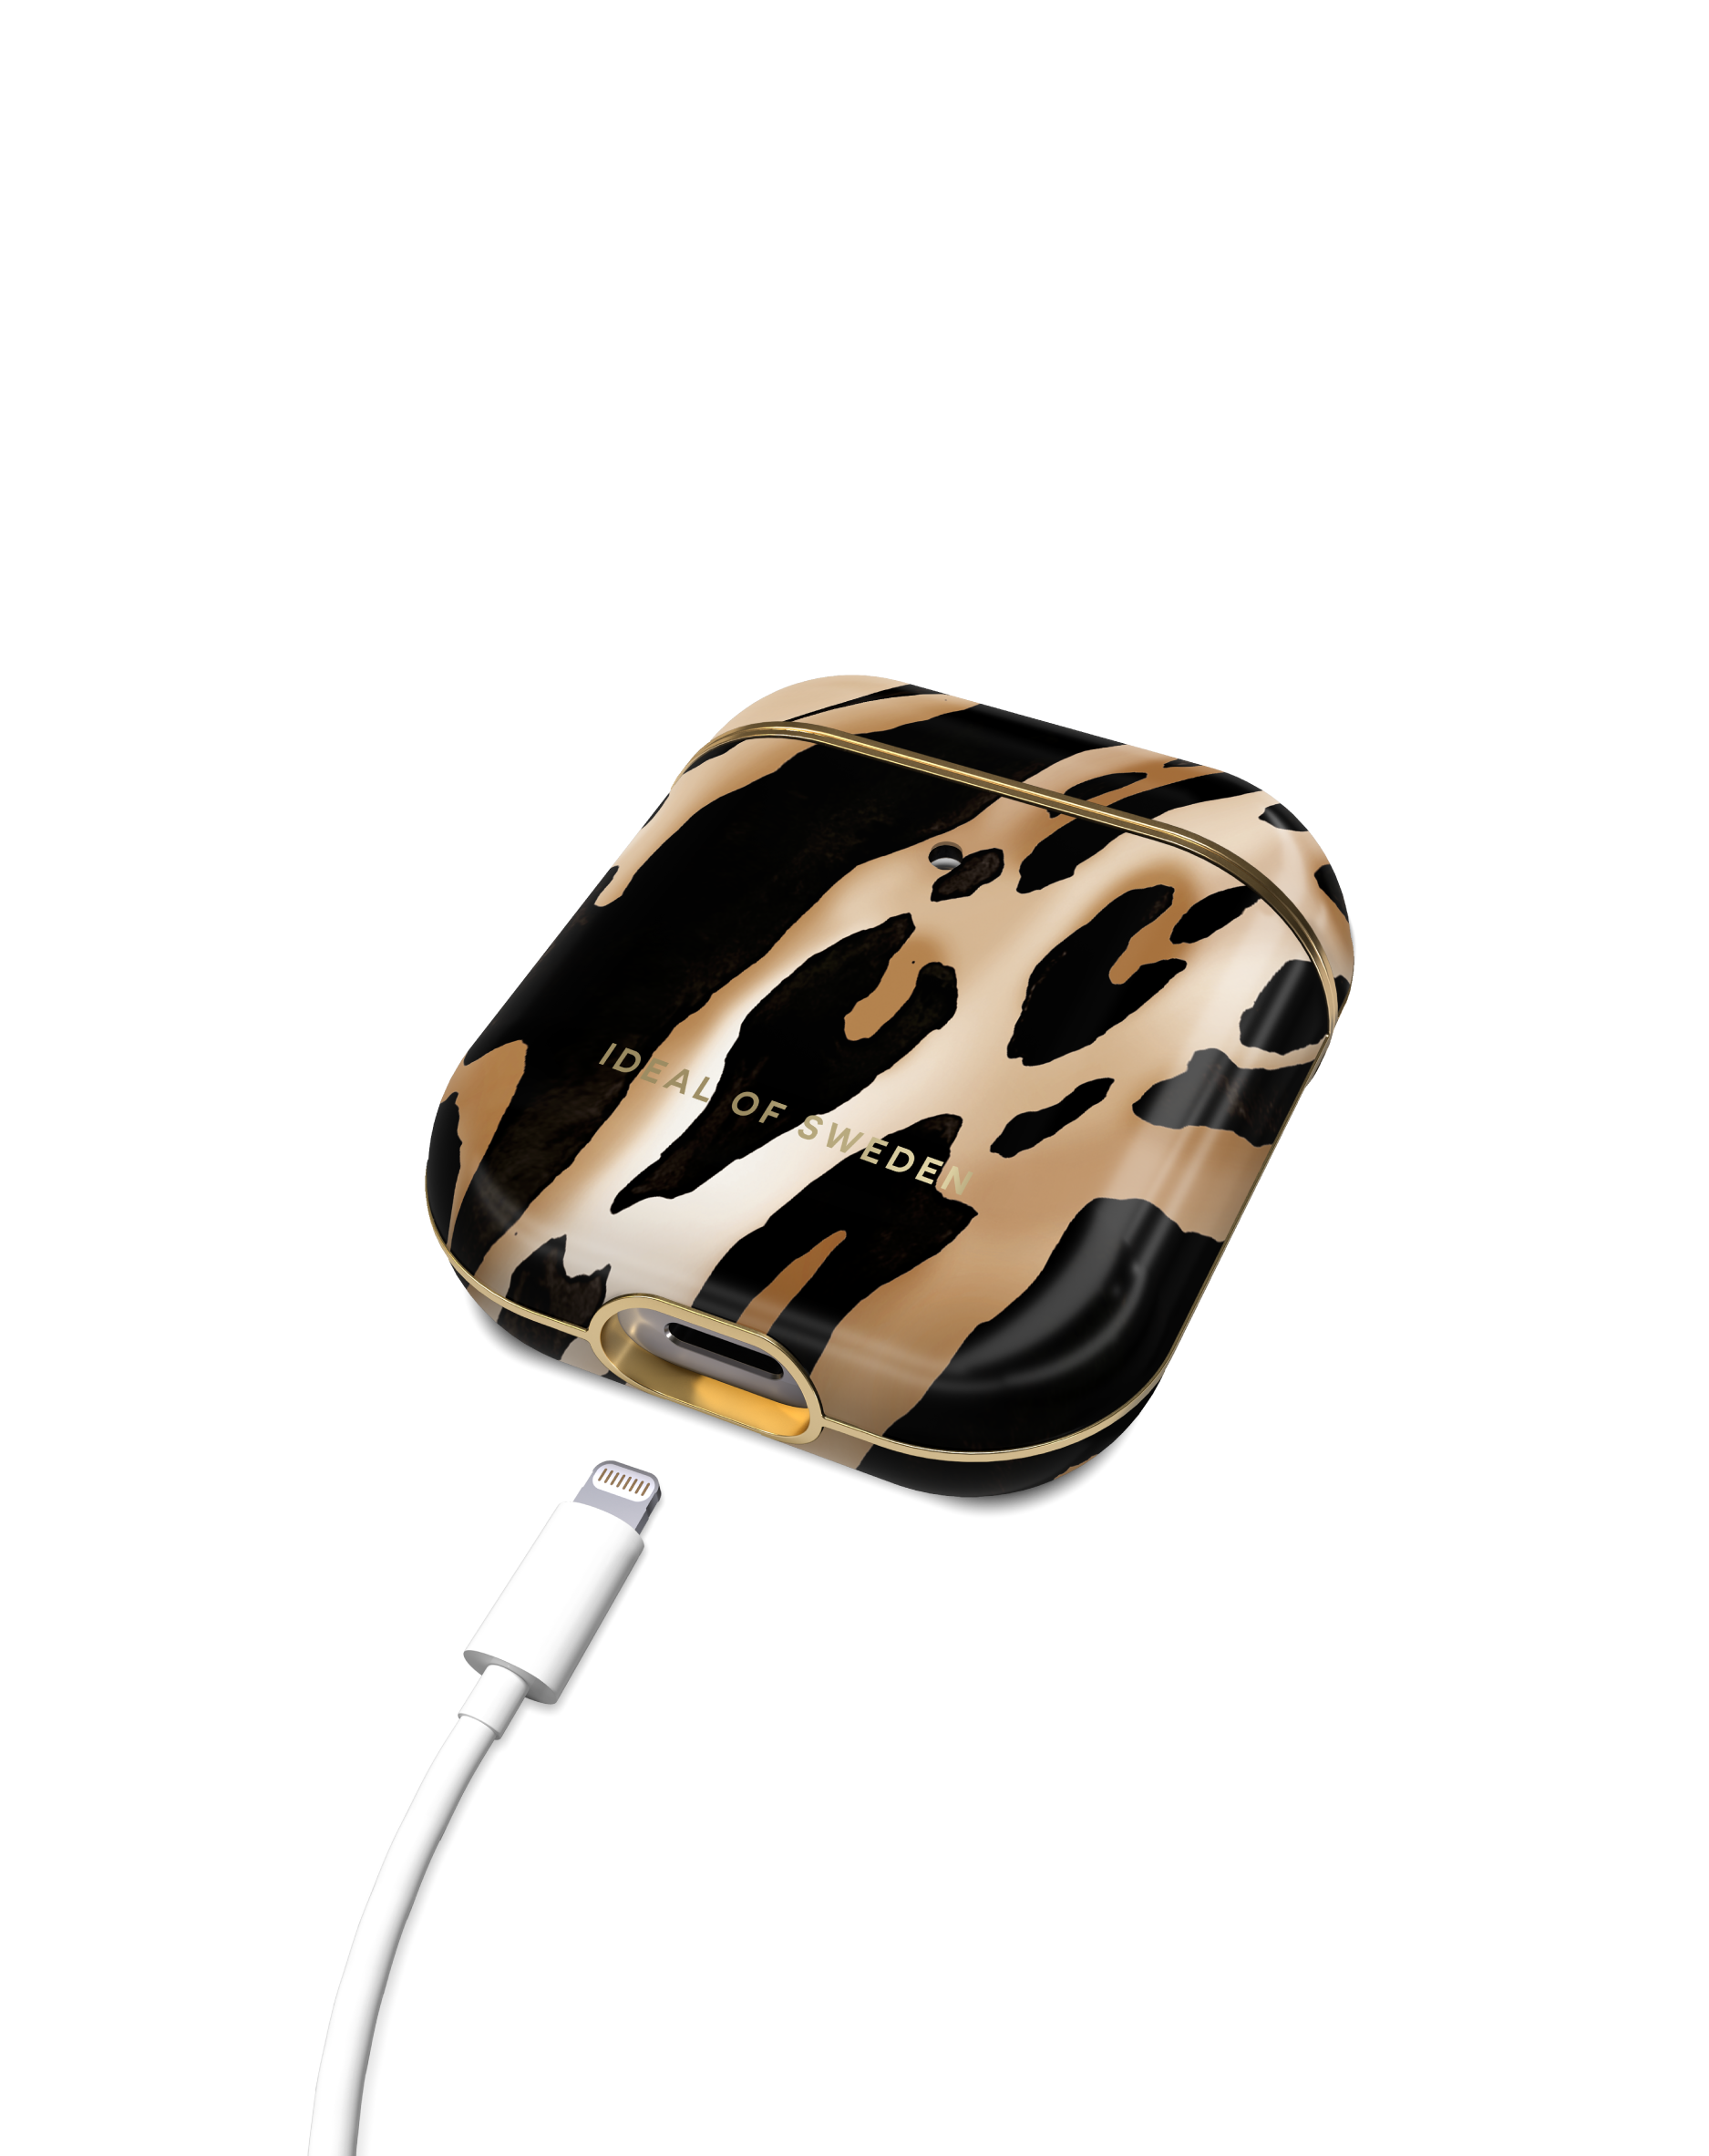 passend Apple AirPod Cover Leopard IDEAL Full für: SWEDEN Case OF IDFAPCAW21-356 Iconic